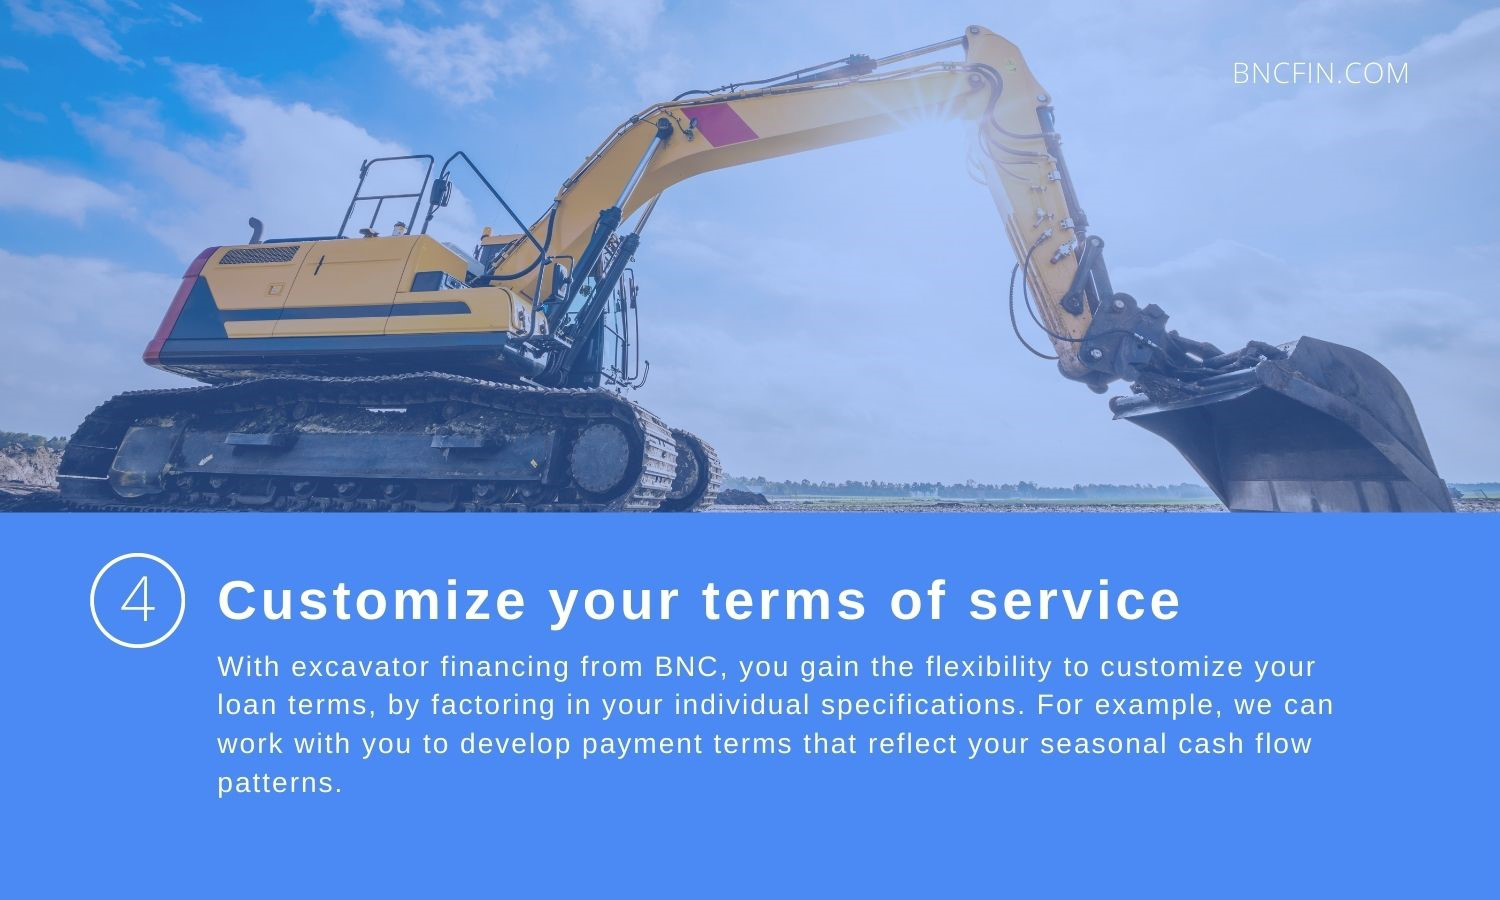 Customize your terms of service.